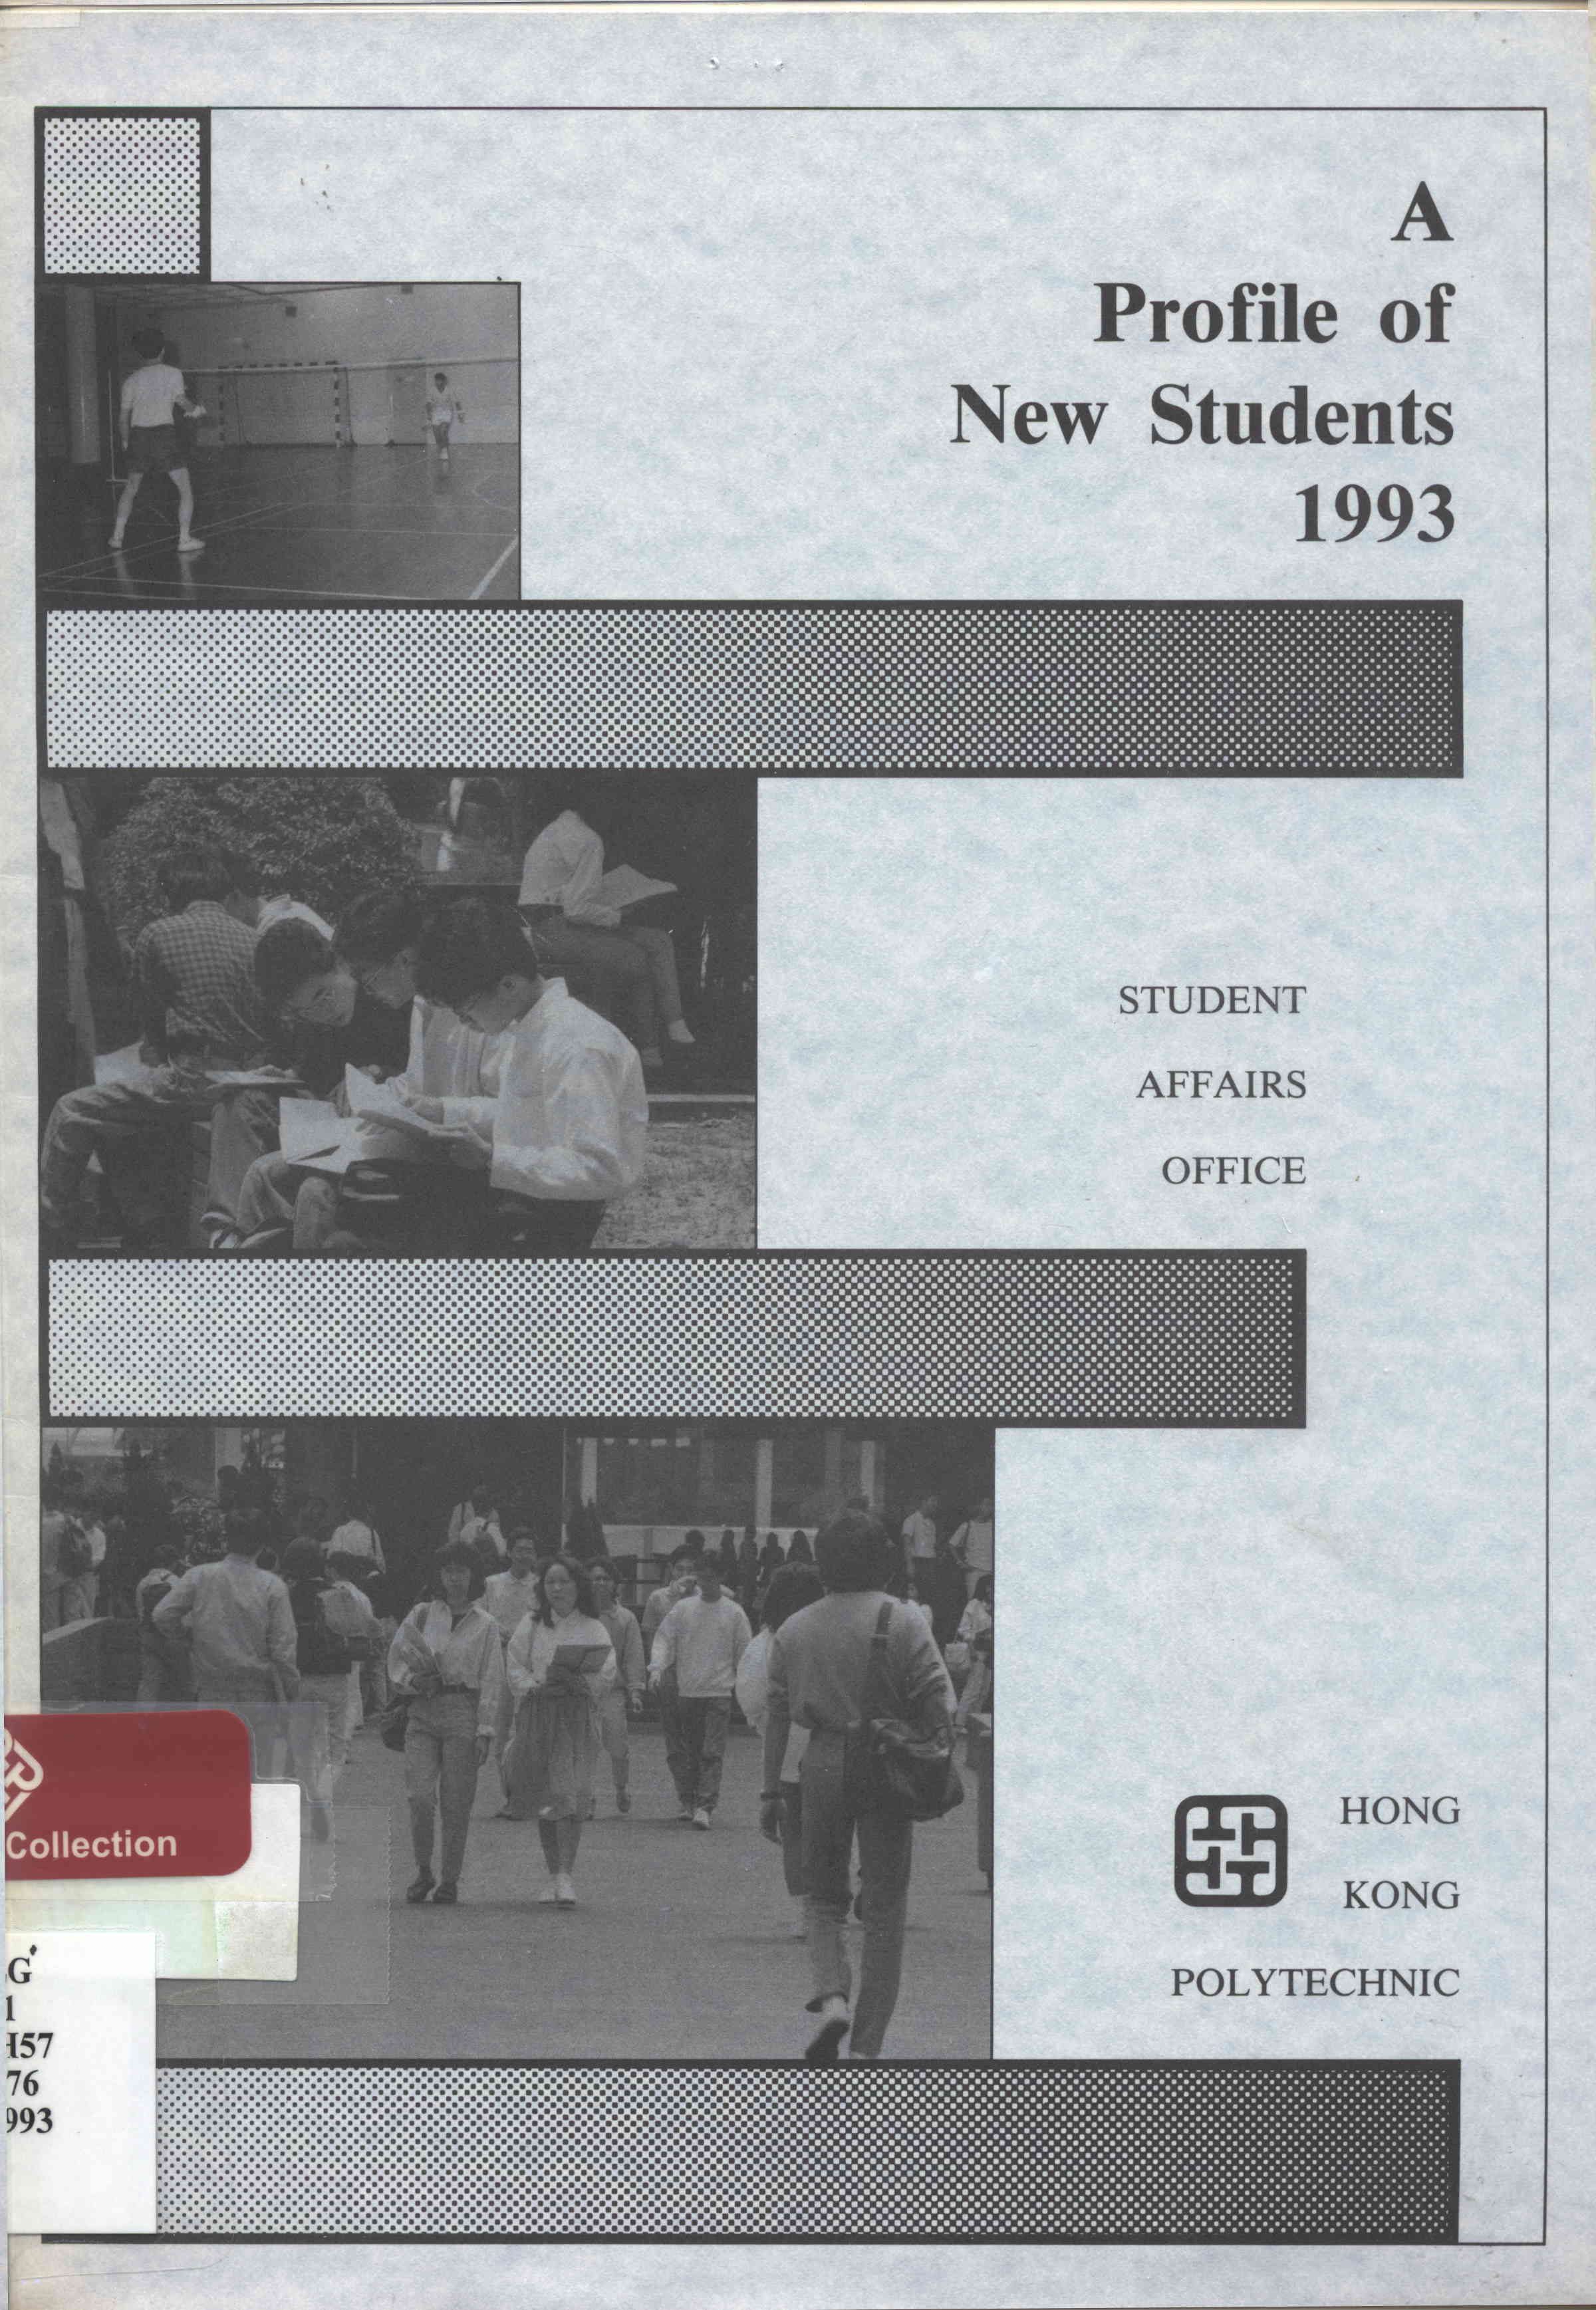 A Profile of new students 1993